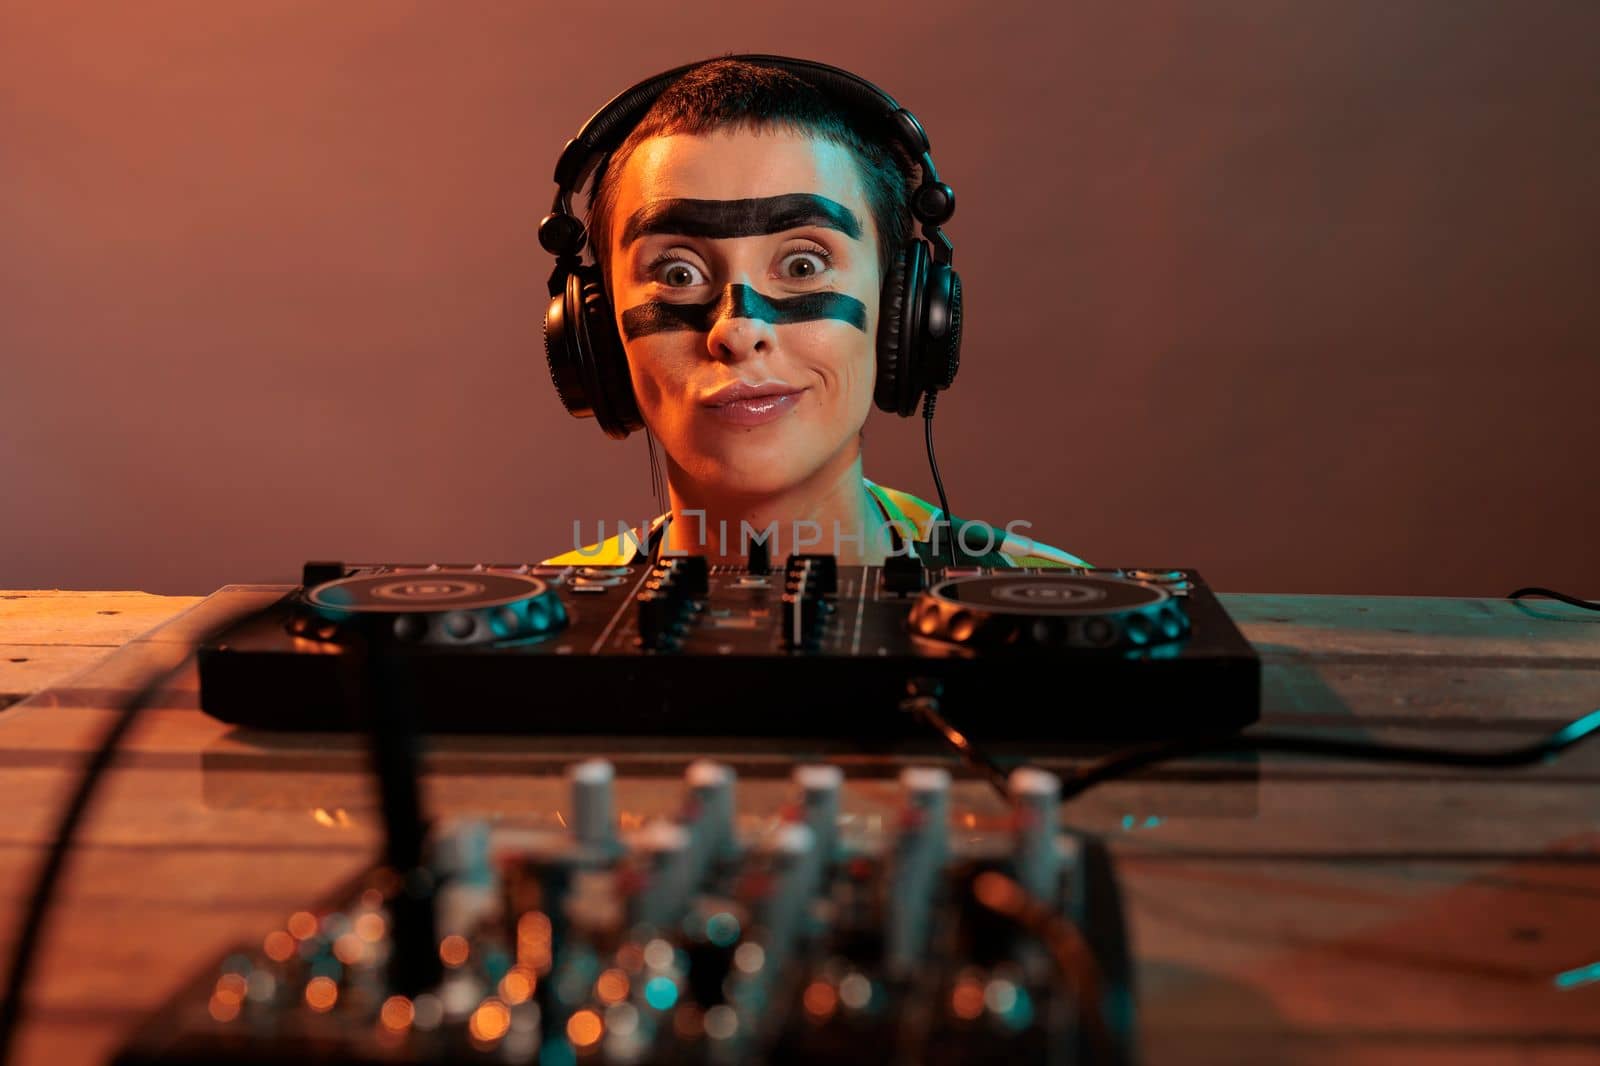 Young performer acting funky looking at mixer, being focused on control buttons at dj turntables over background. Looking closely at audio equipment to mix techno music, stereo instrument.